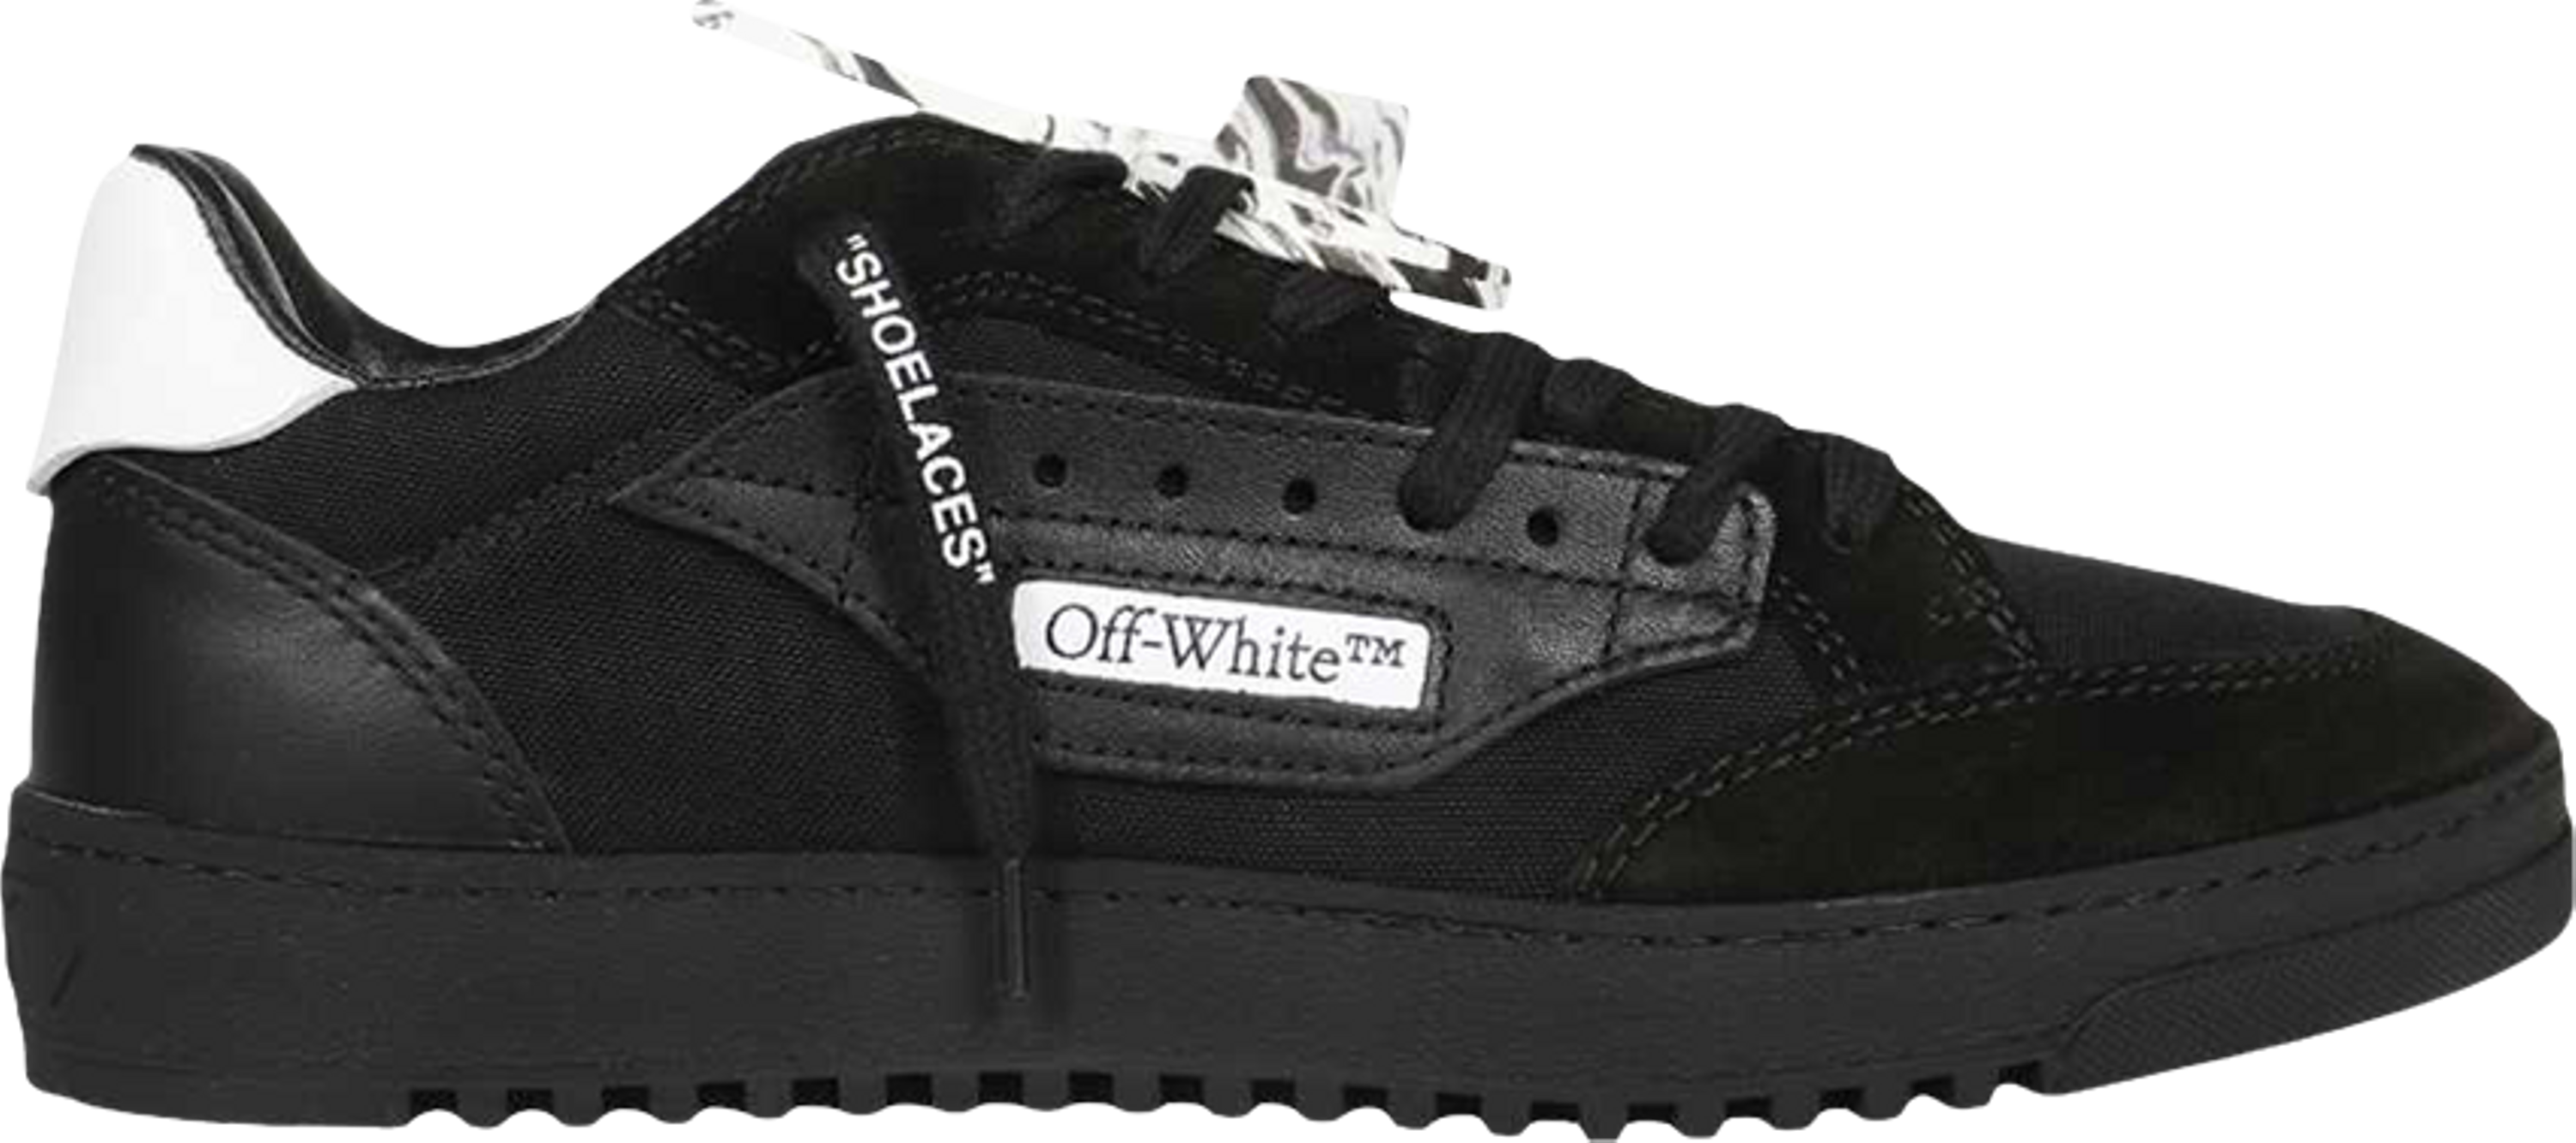 Buy Off-White 5.0 Low 'Black' 2022 - OMIA227S22FAB001 1001 | GOAT